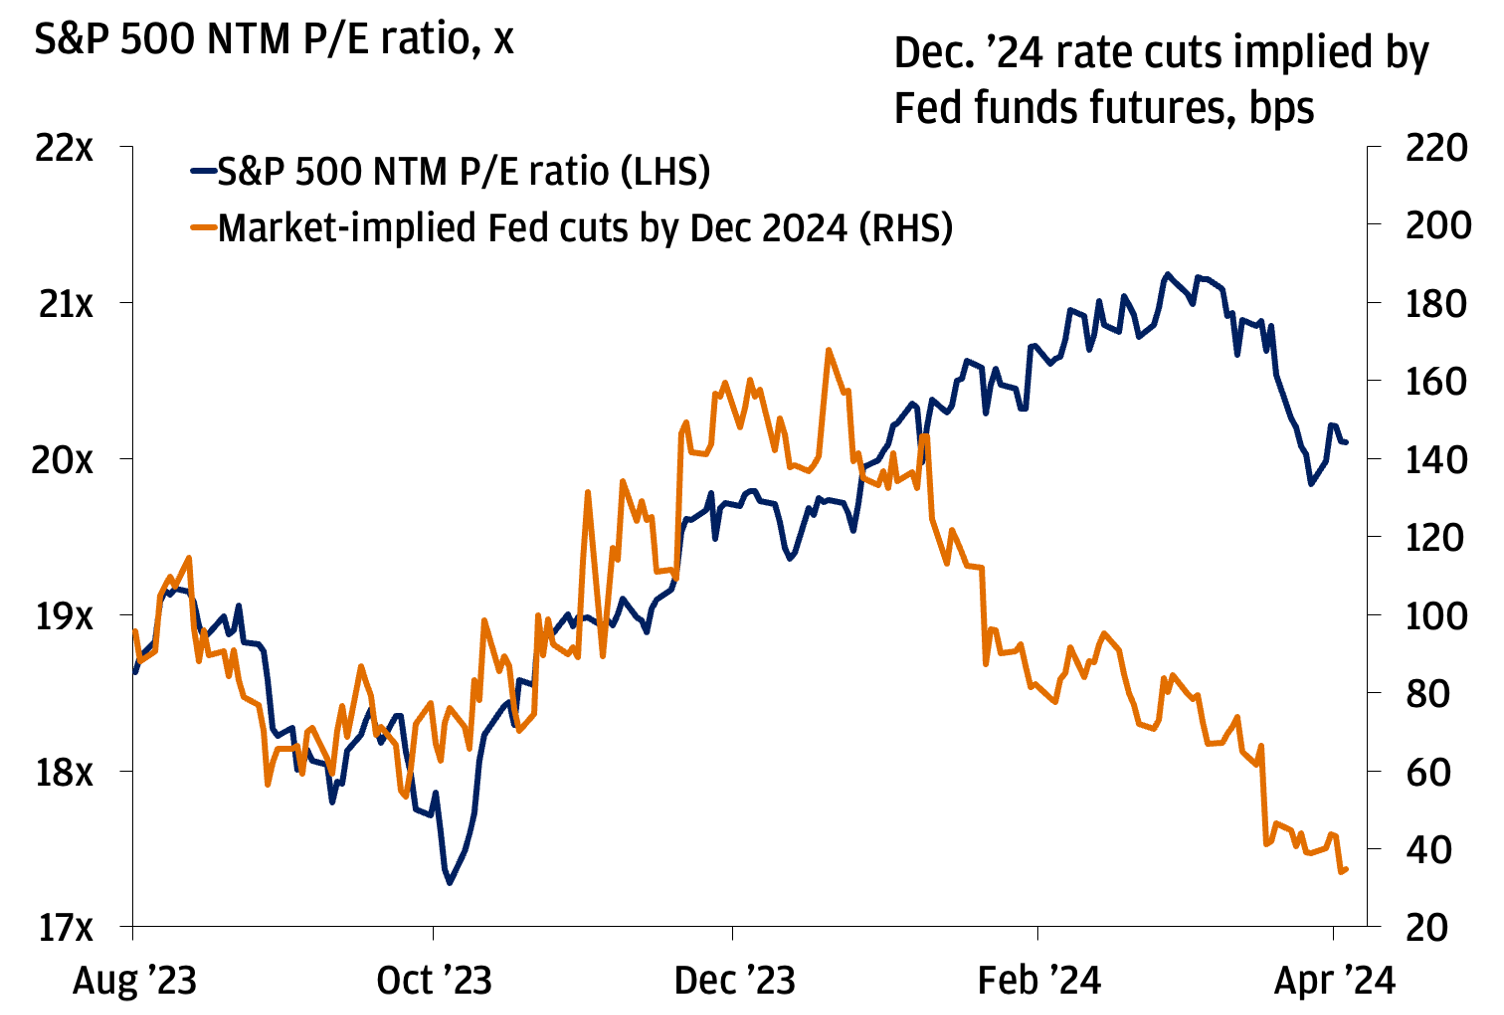 This chart shows the S&P 500 next 12-month price-to-earnings ratio against the December 2024 policy rate implied by fed funds futures from August 2023 to today.